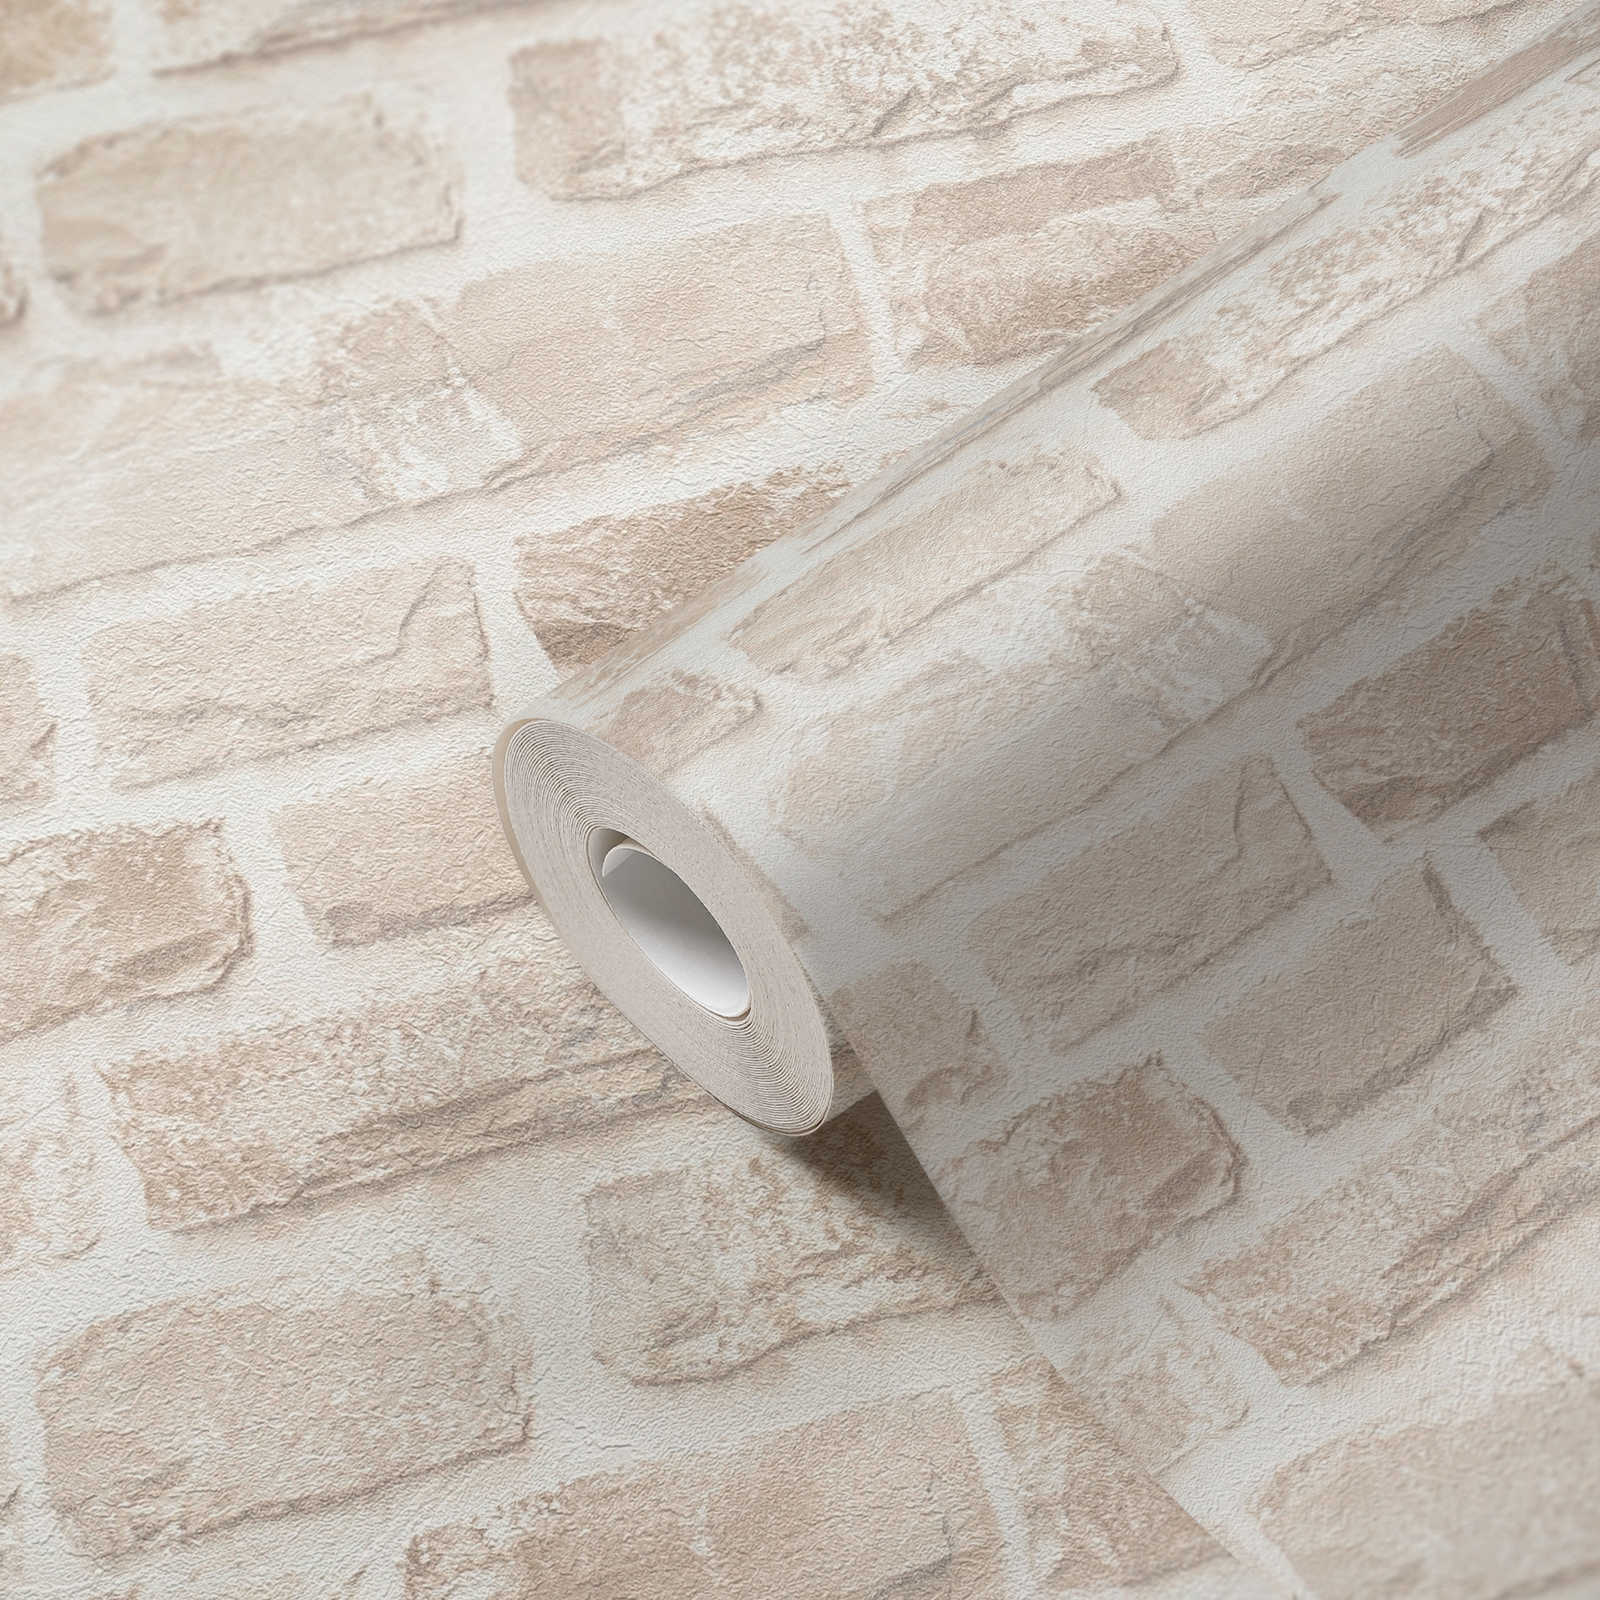             Non-woven wallpaper with stone look PVC-free - beige, white
        